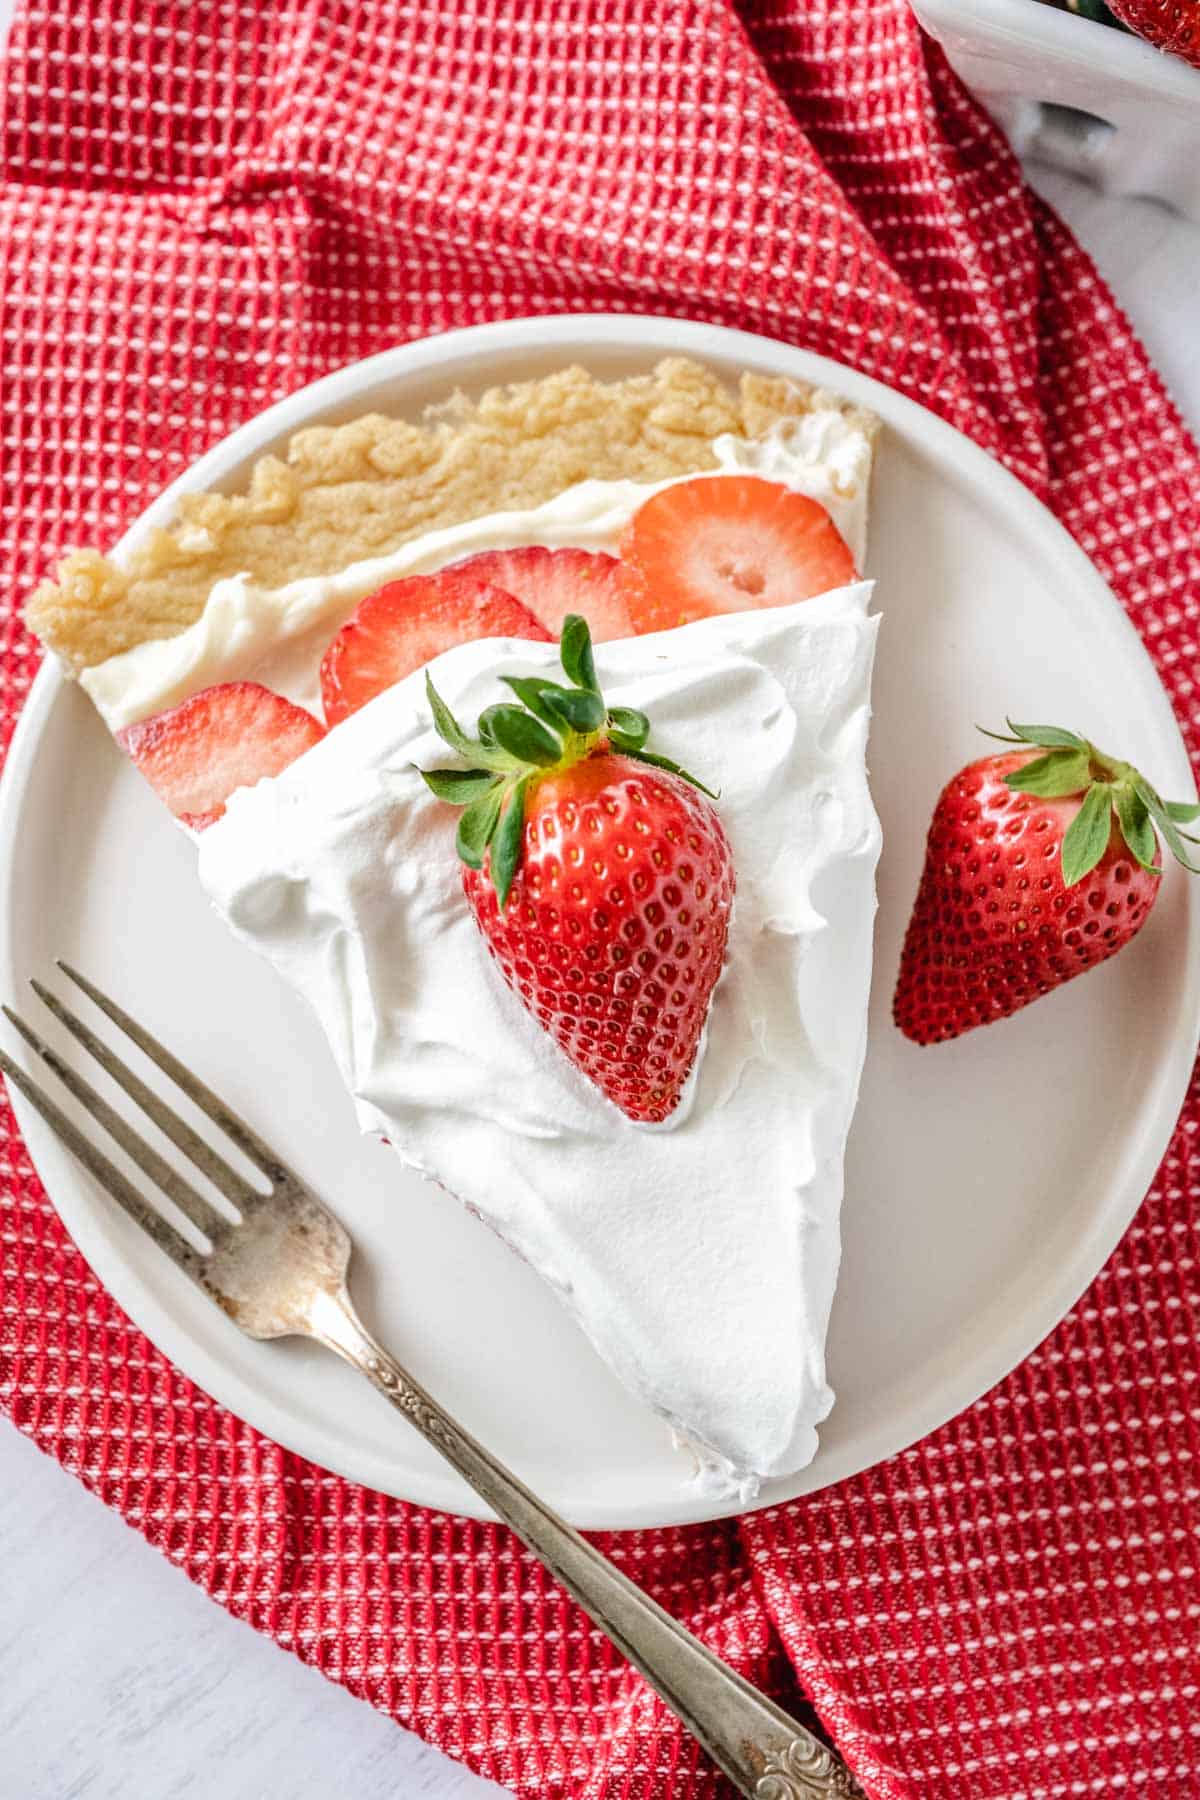 Slice of strawberry dessert on a white plate with a vintage fork beside the slice.